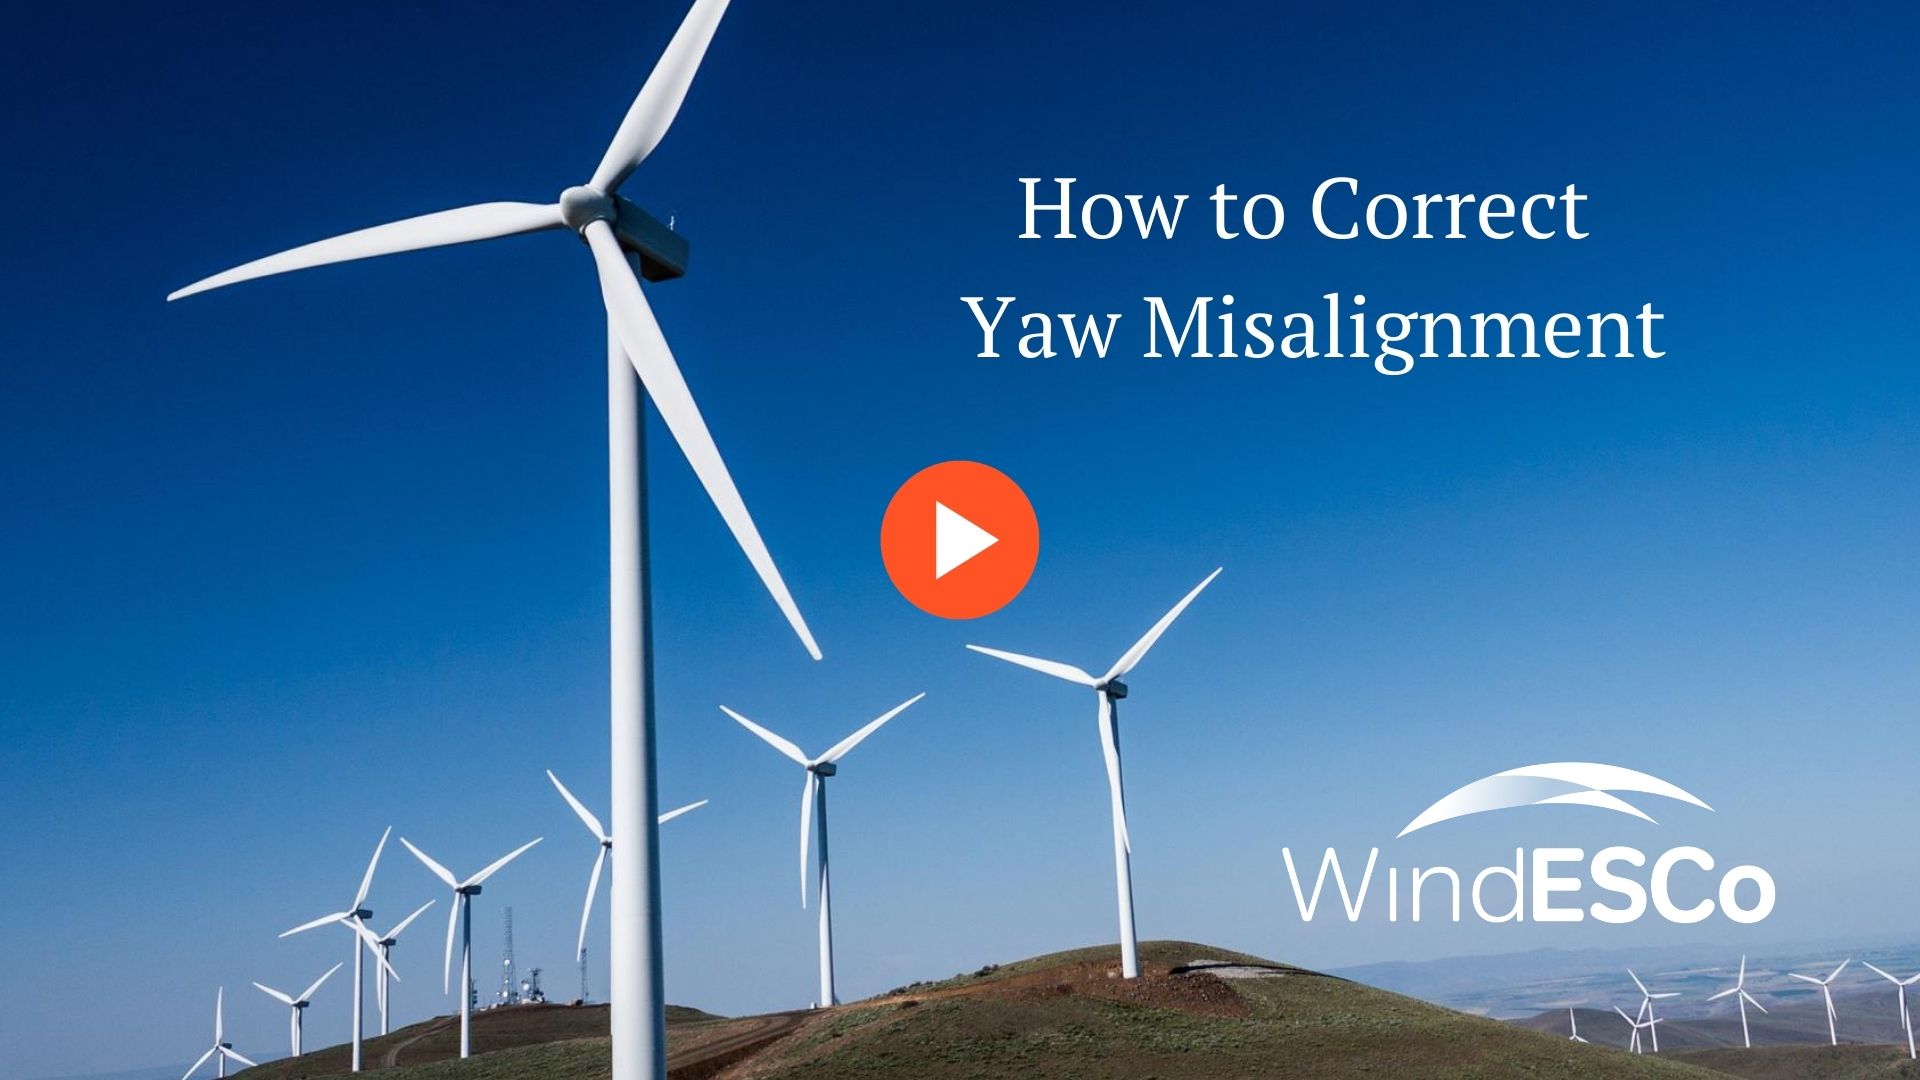 How to Correct Yaw Misalignment